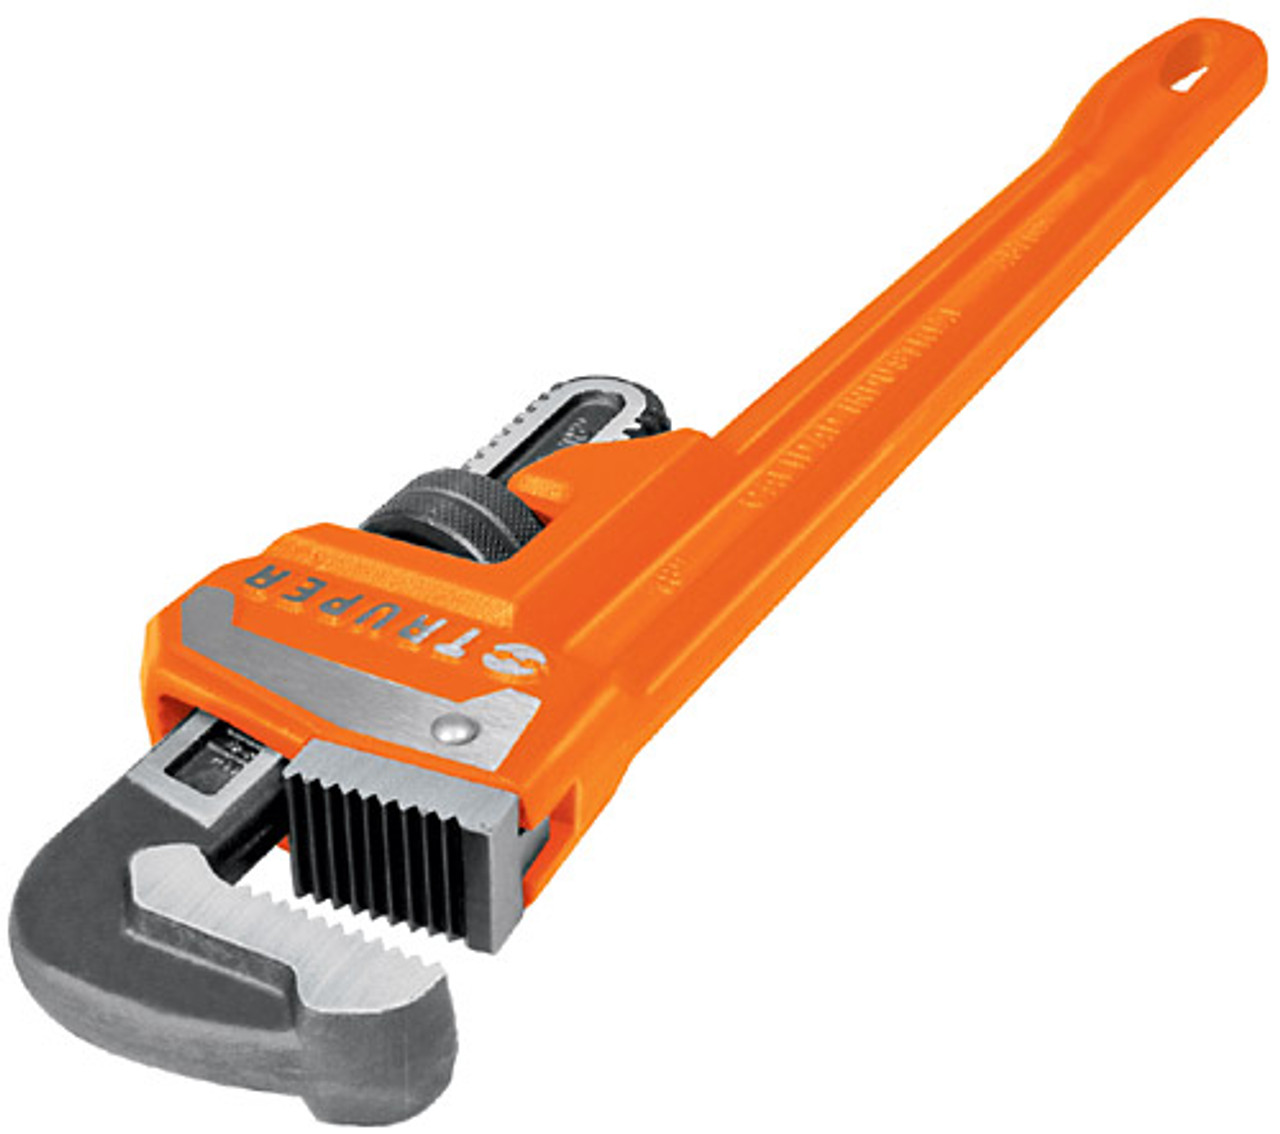 Truper Heavy Duty Pipe Wrenches, 12" Pipe Wrench #15837